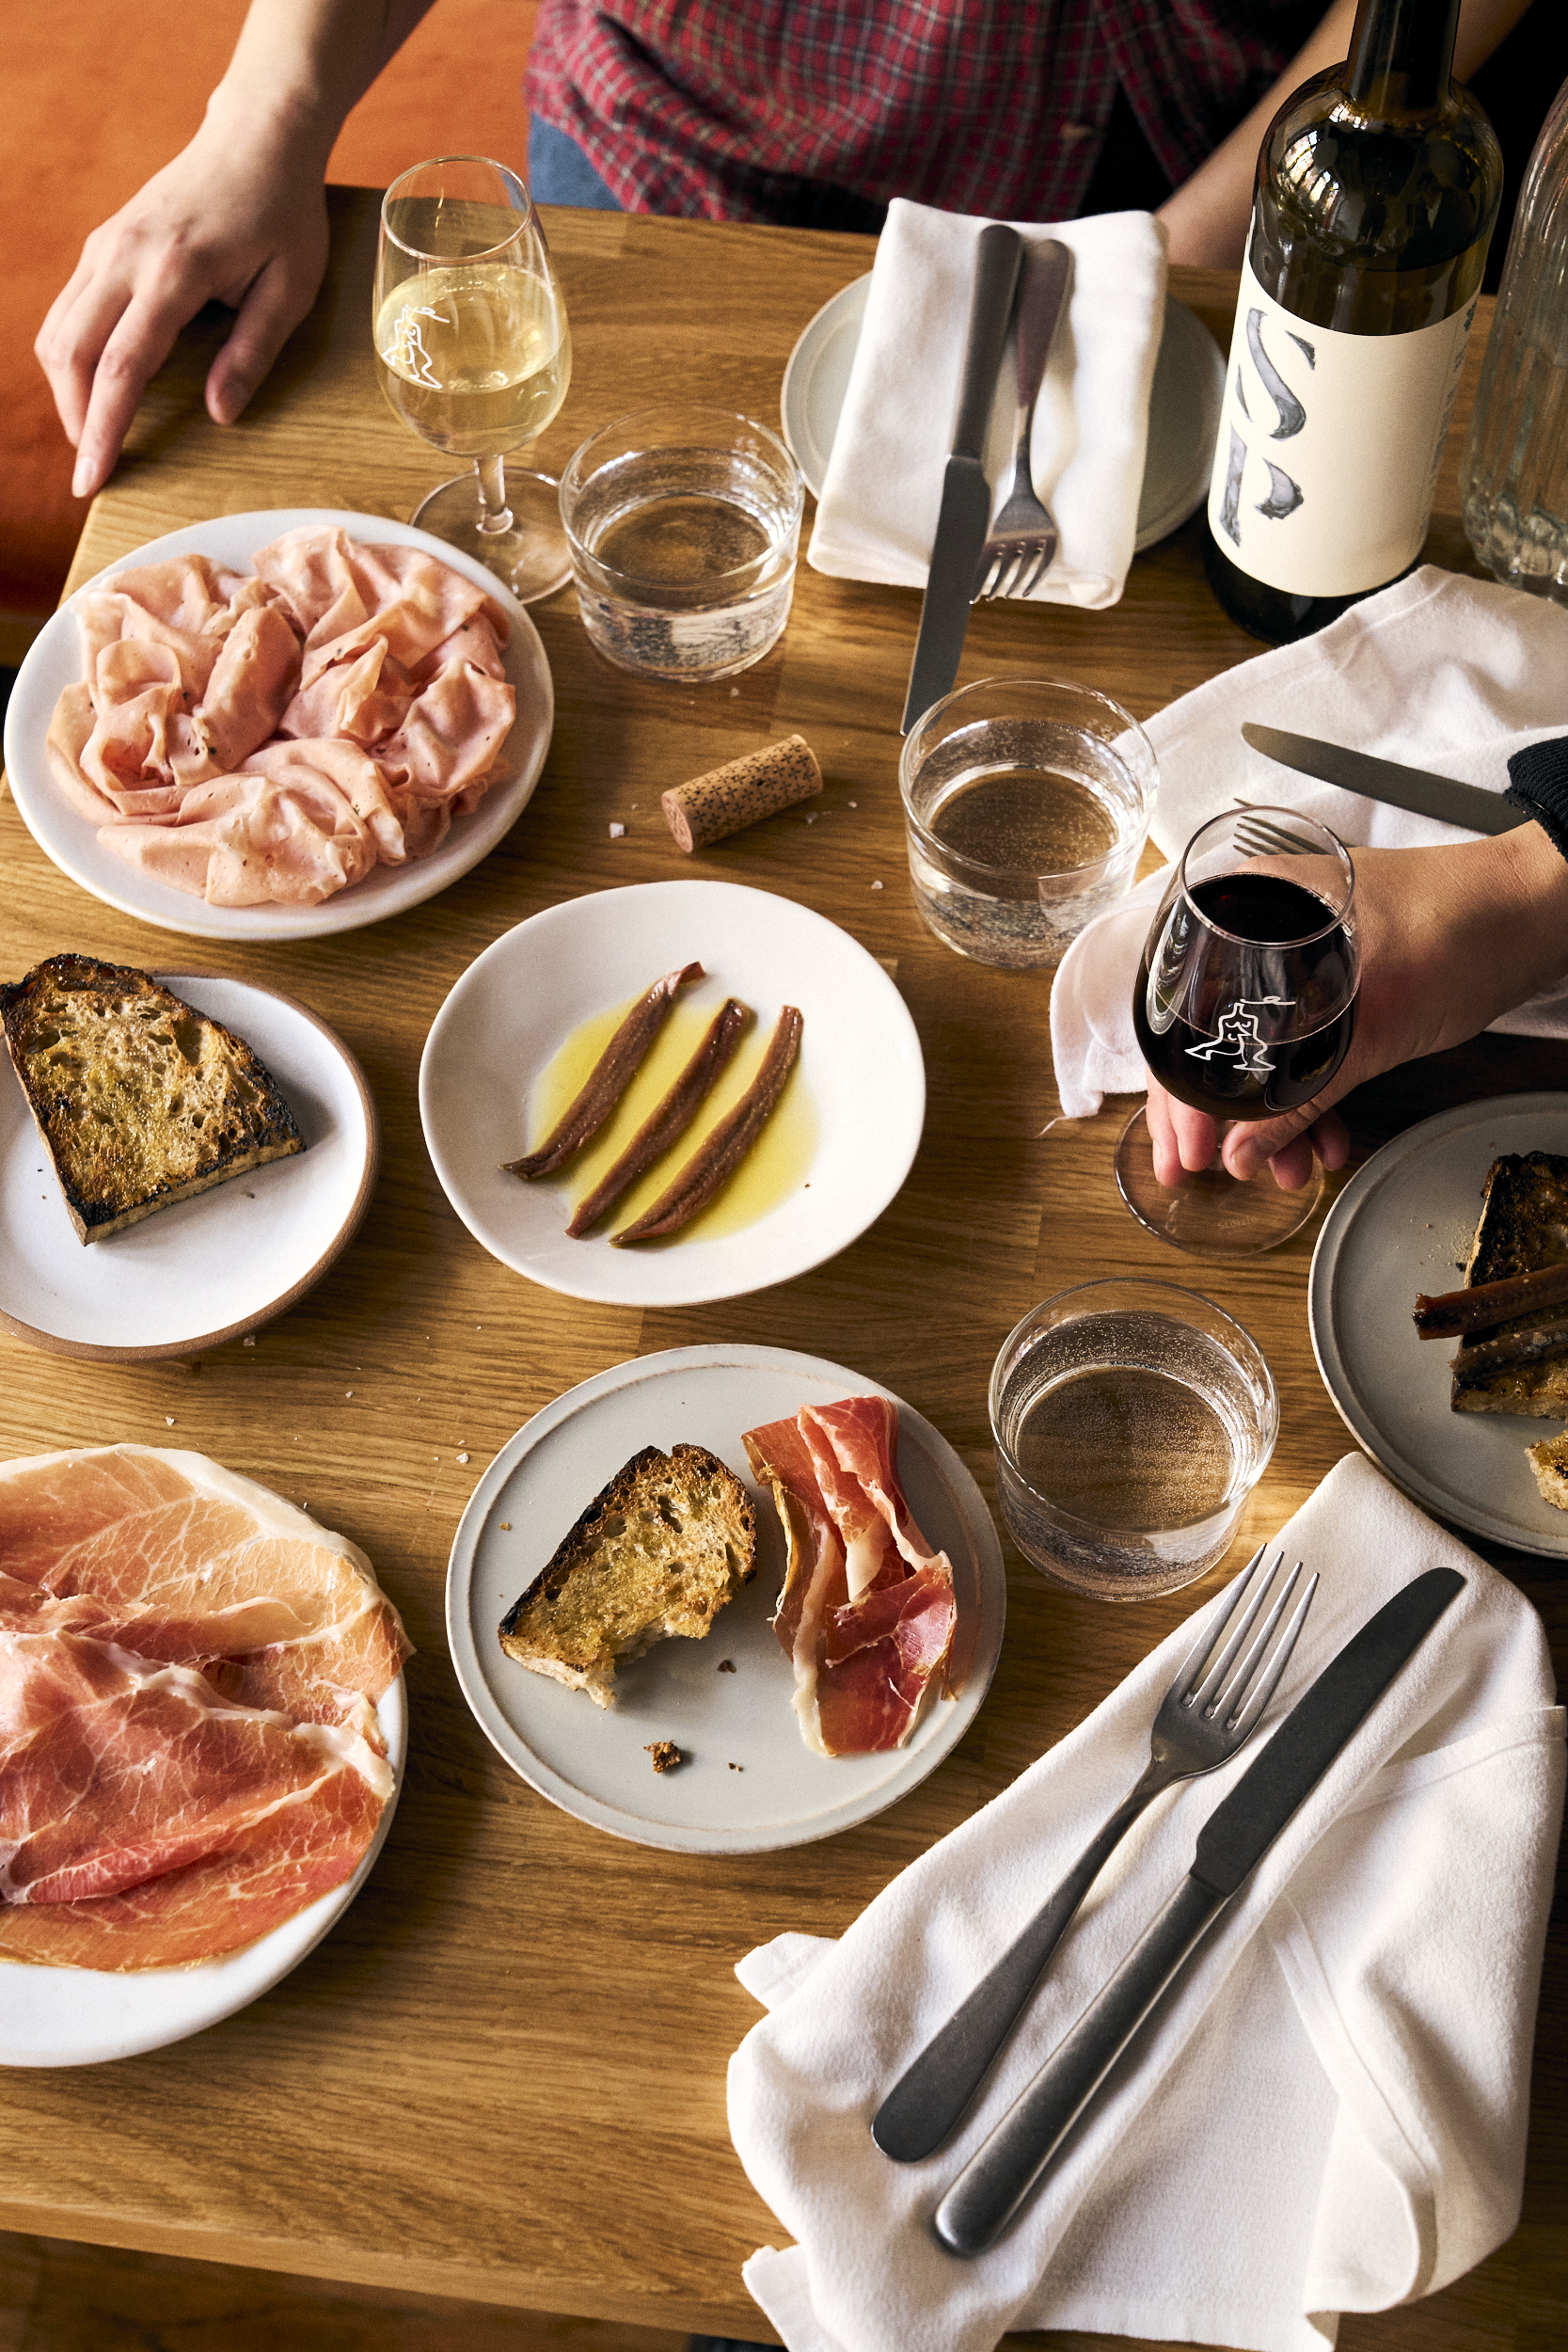 A wooden table with a spread of ham, mortadella, bread, anchovies, and glasses of wine.